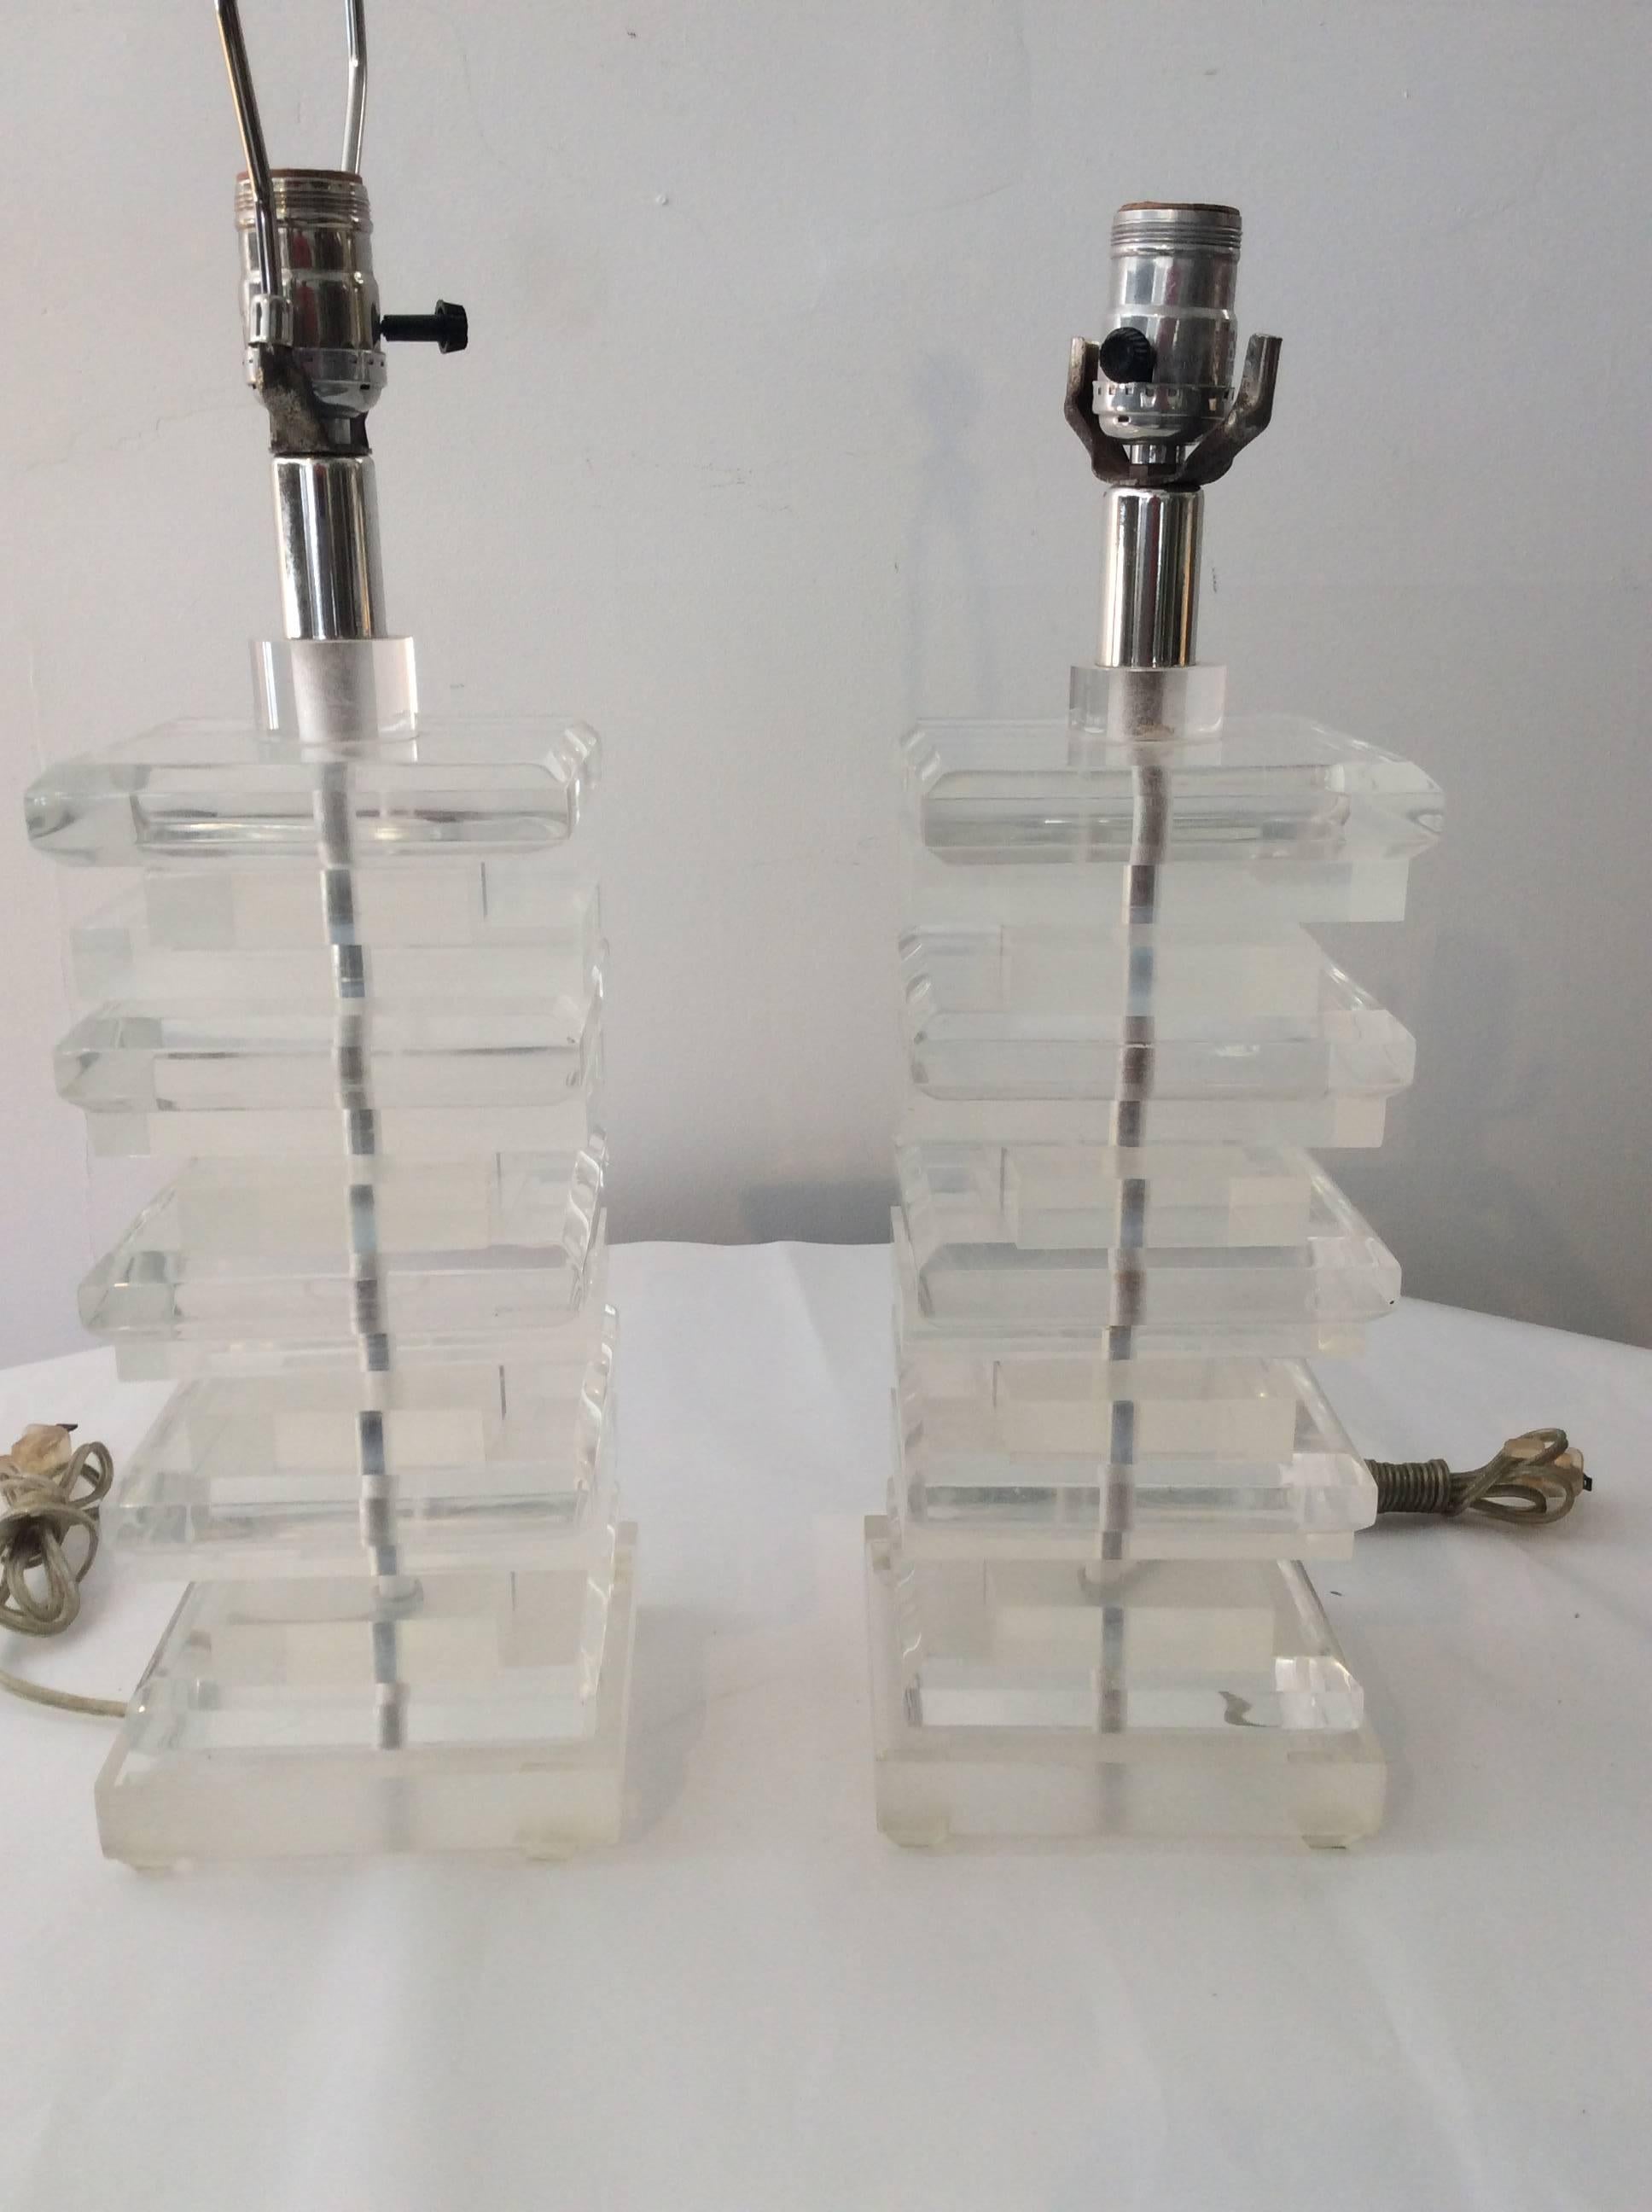 You are looking at a very versatile pair of Chuncky clear Lucite table lamps. These lamps would work in many decor styles. They are vintage and are in good overall condition with expected wear consistent with age. The Lucite is pretty much clear.